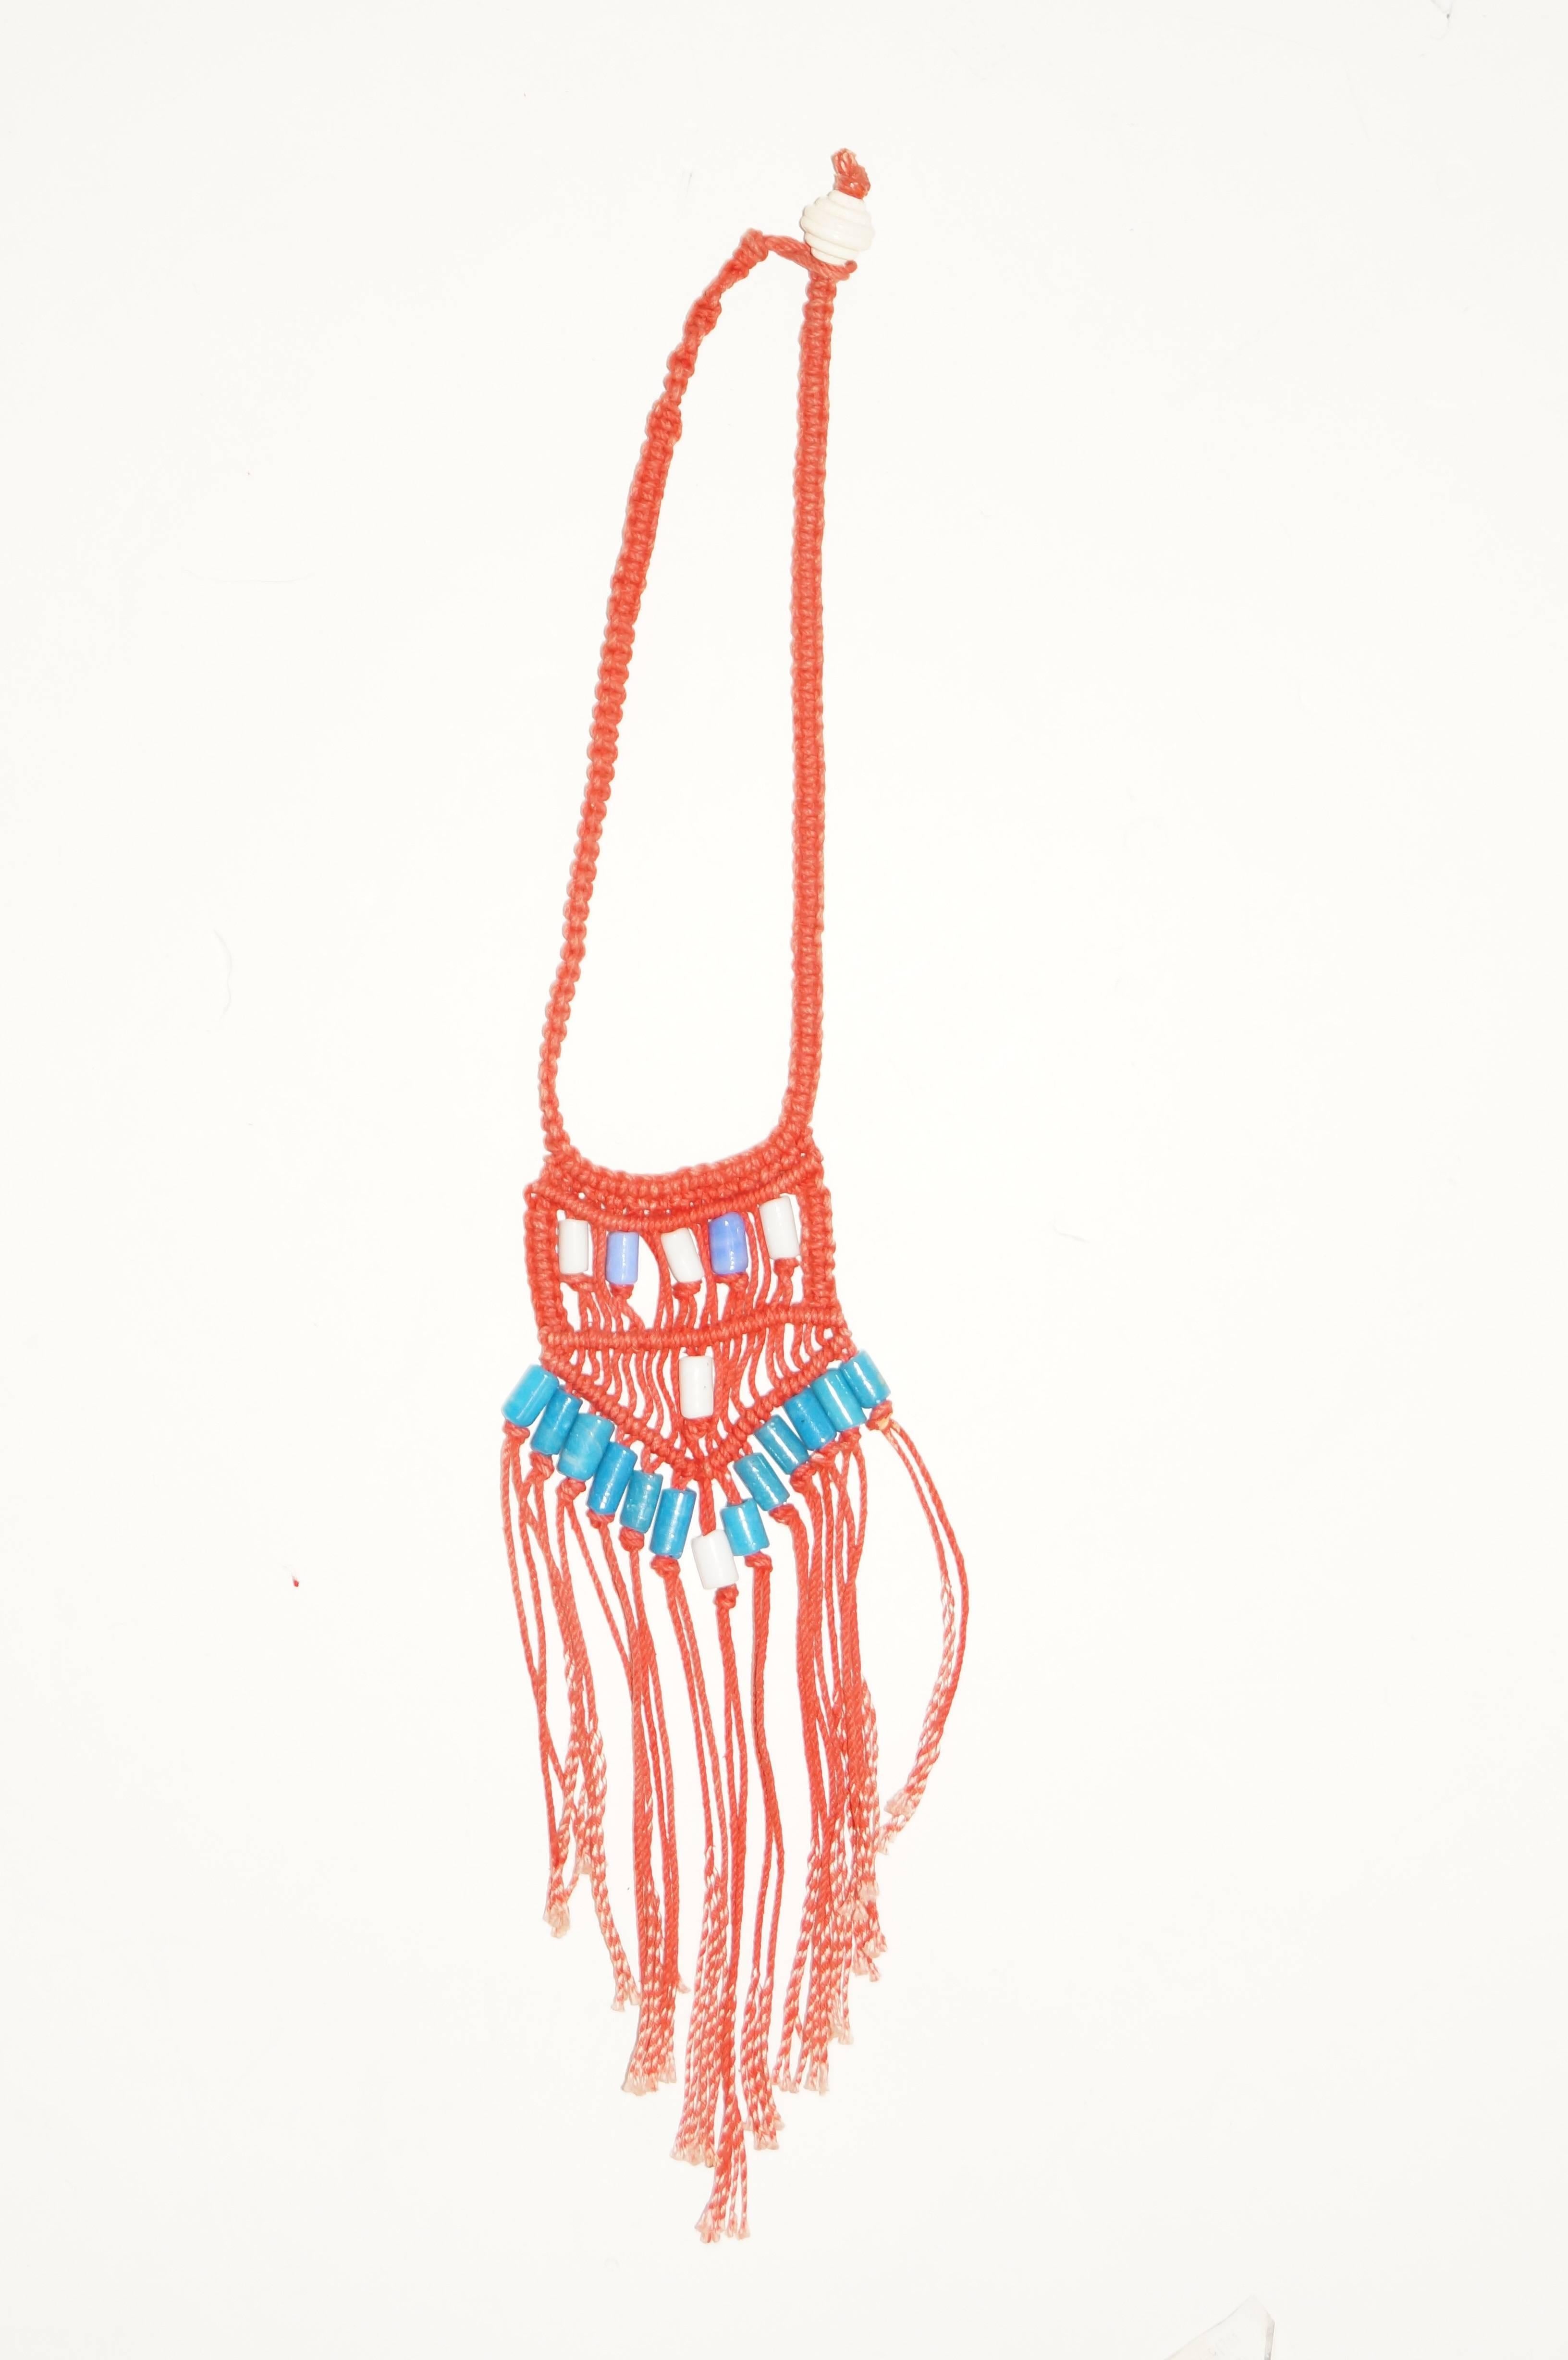 Custom red macrame boho necklace with blue ceramic beading and tassels. White wood bead at loop closure.

18" neck
9' Length